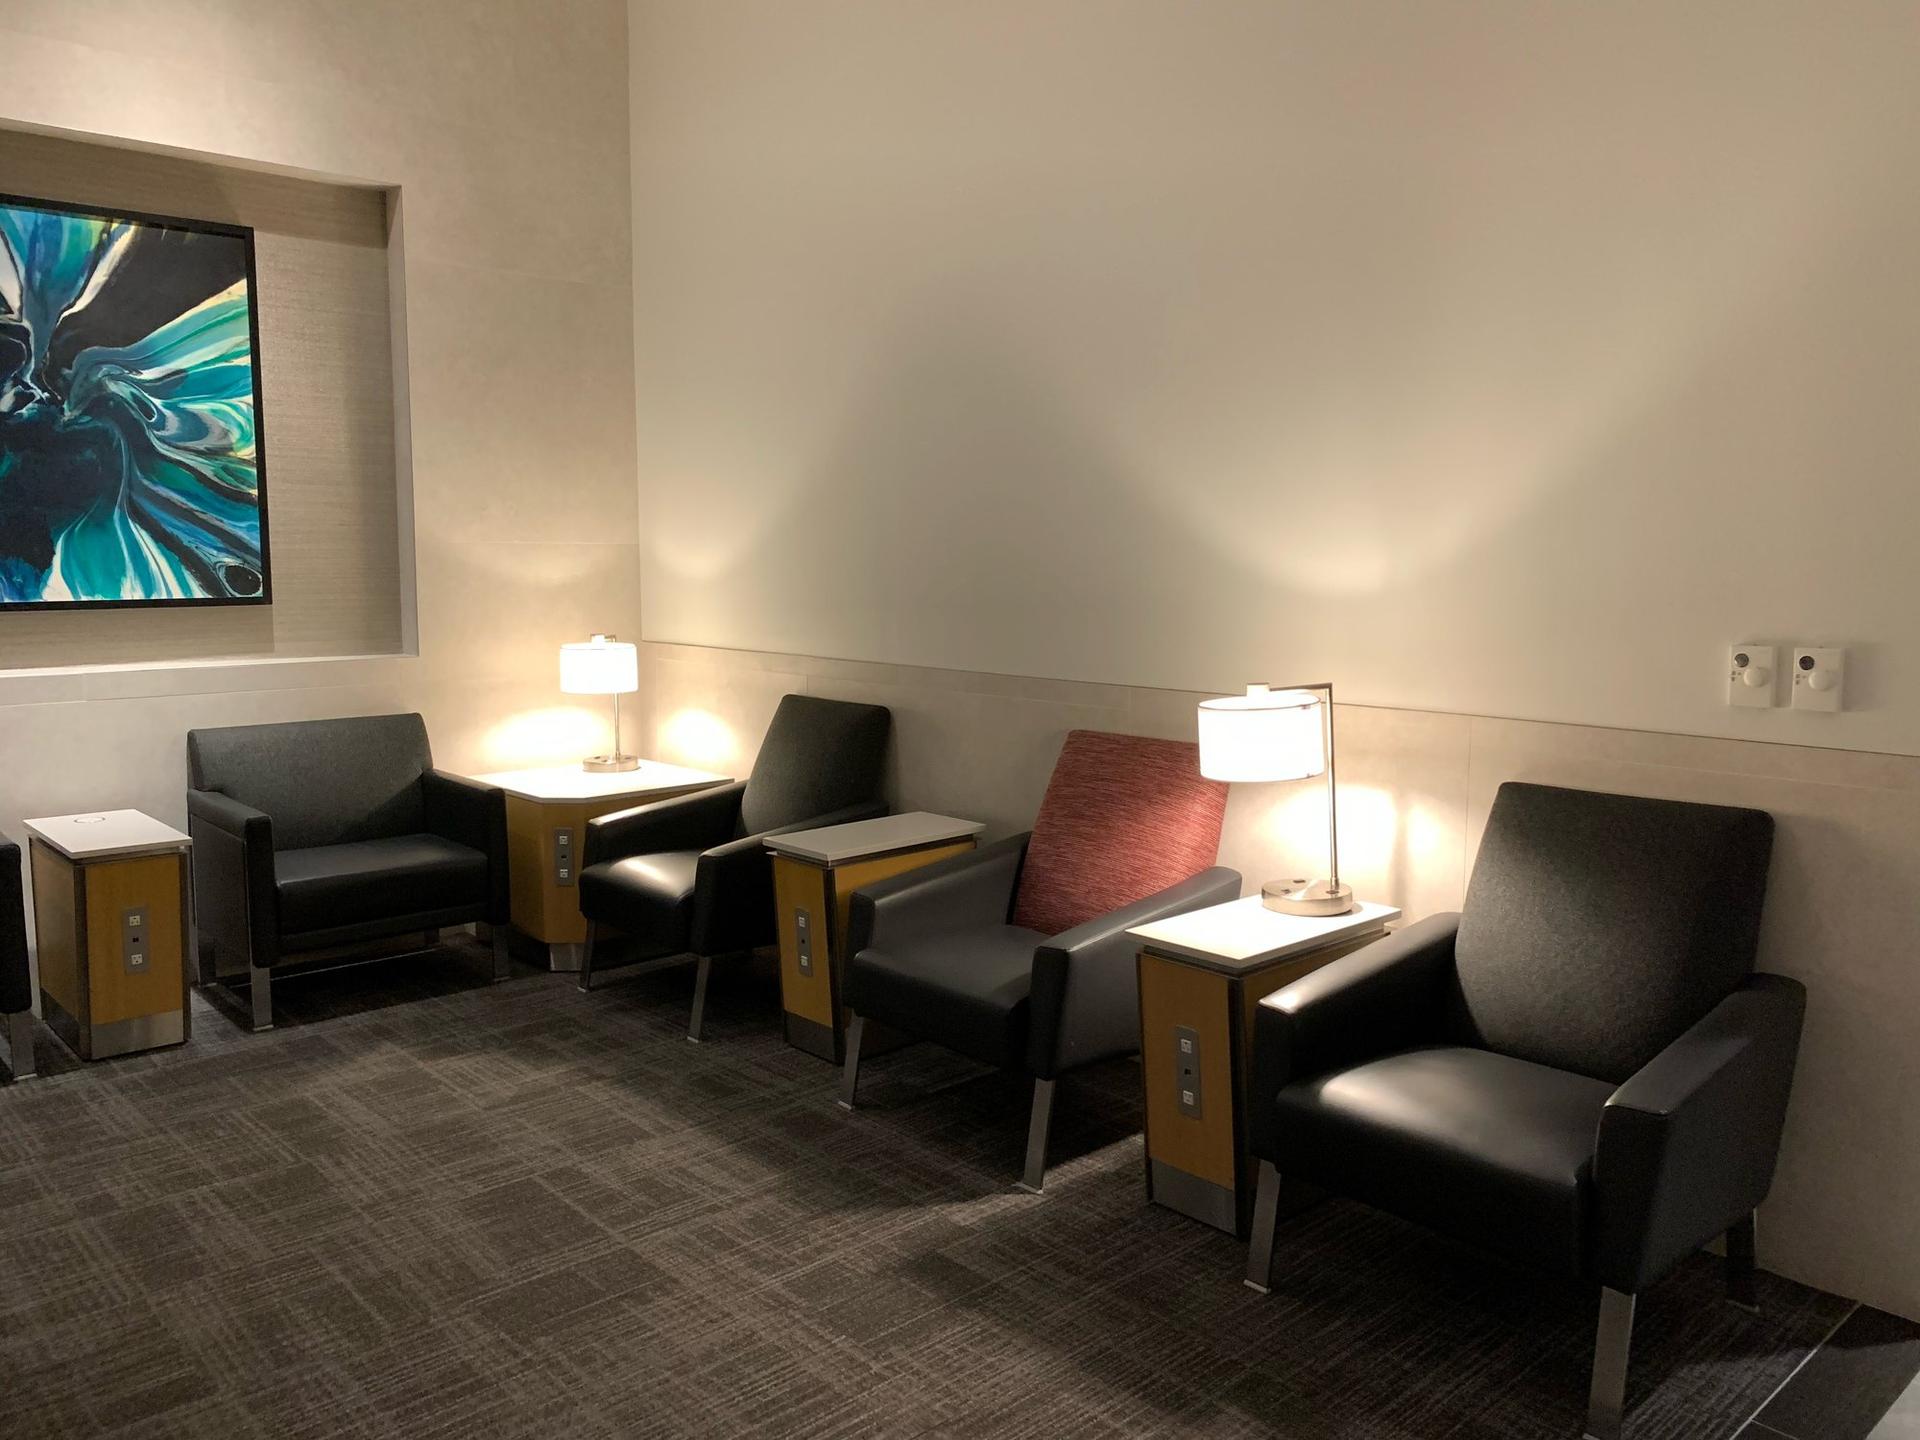 American Airlines Flagship Lounge image 8 of 55